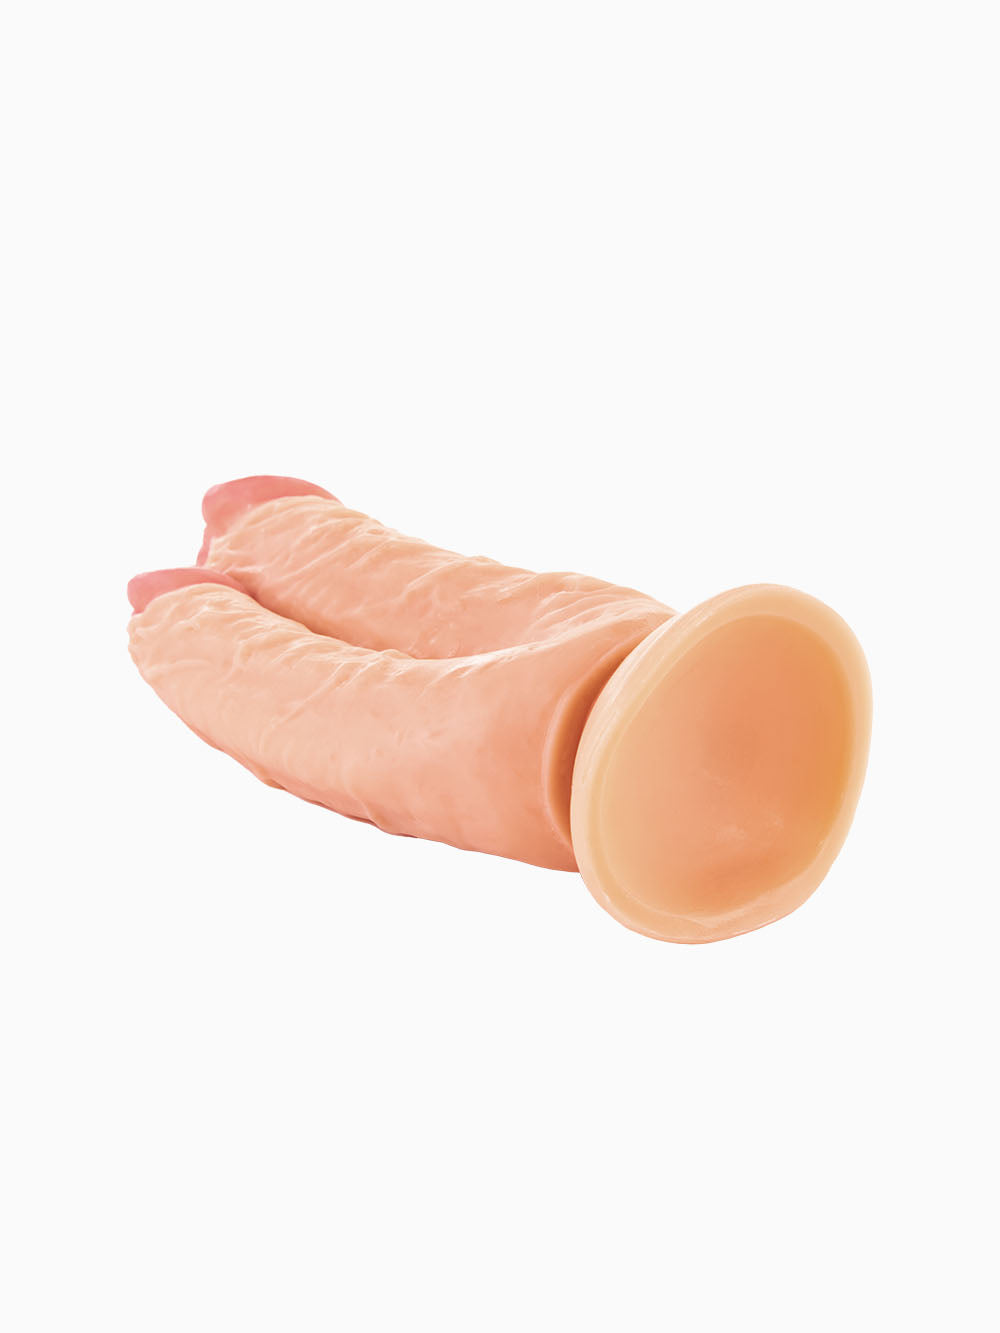 Pillow Talk Double Trouble Dildo, 7 Inches, Nude